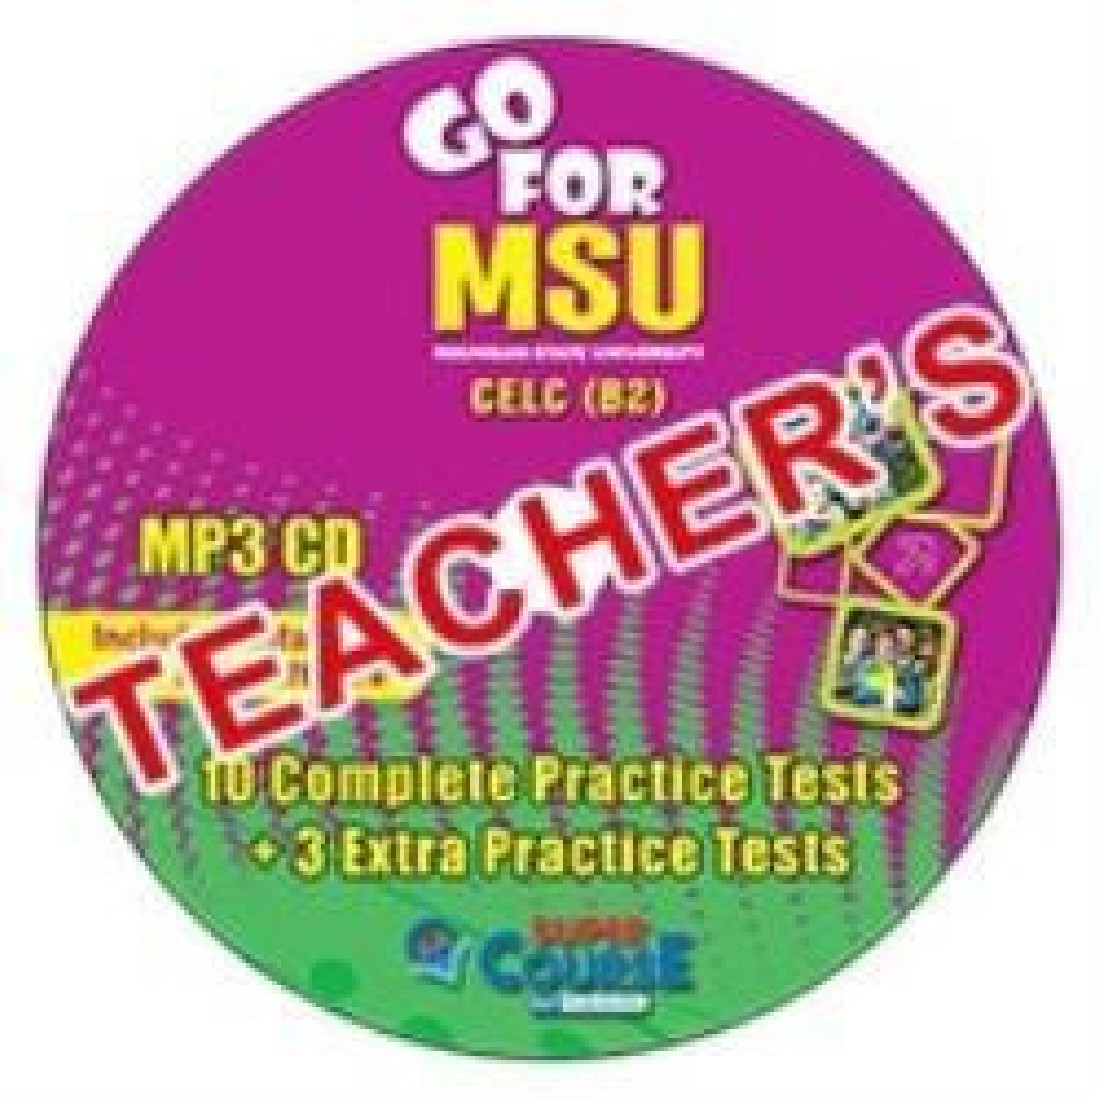 GO FOR MSU CELC (B2) 10 COMPLETE PRACTICE TESTS MP3-CD